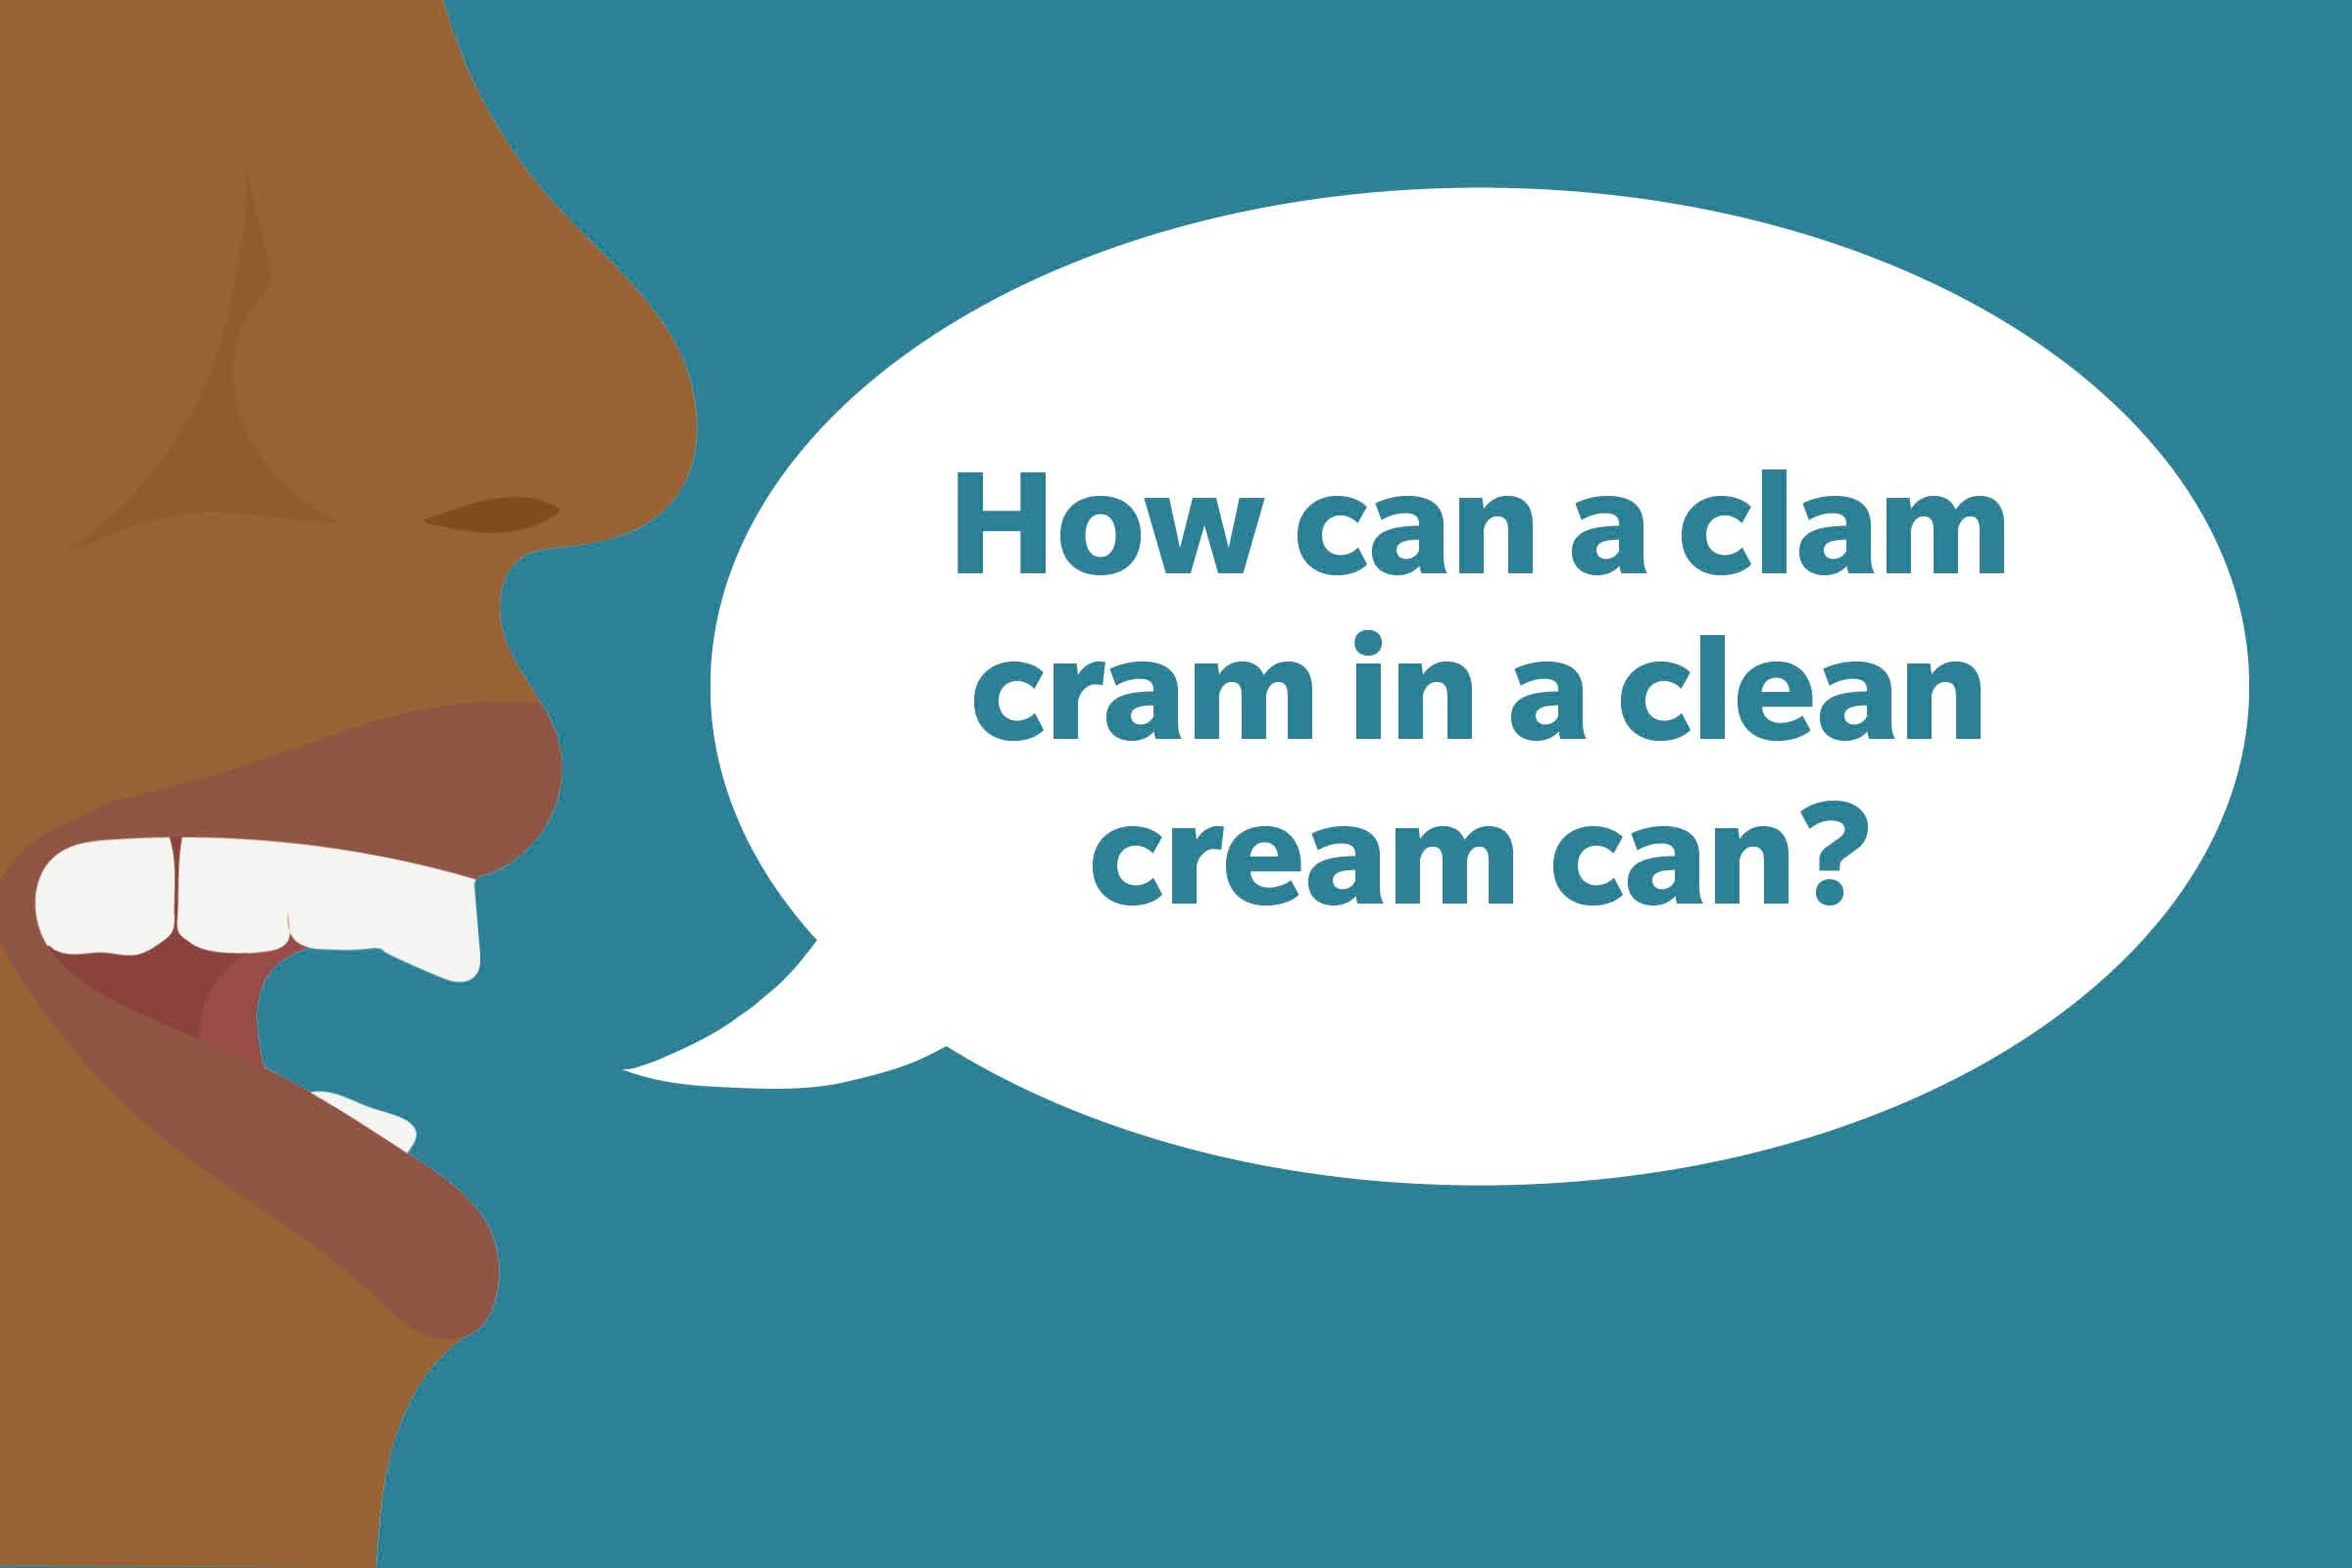 Tongue Twister: How can a clam cram in a clean cream can?